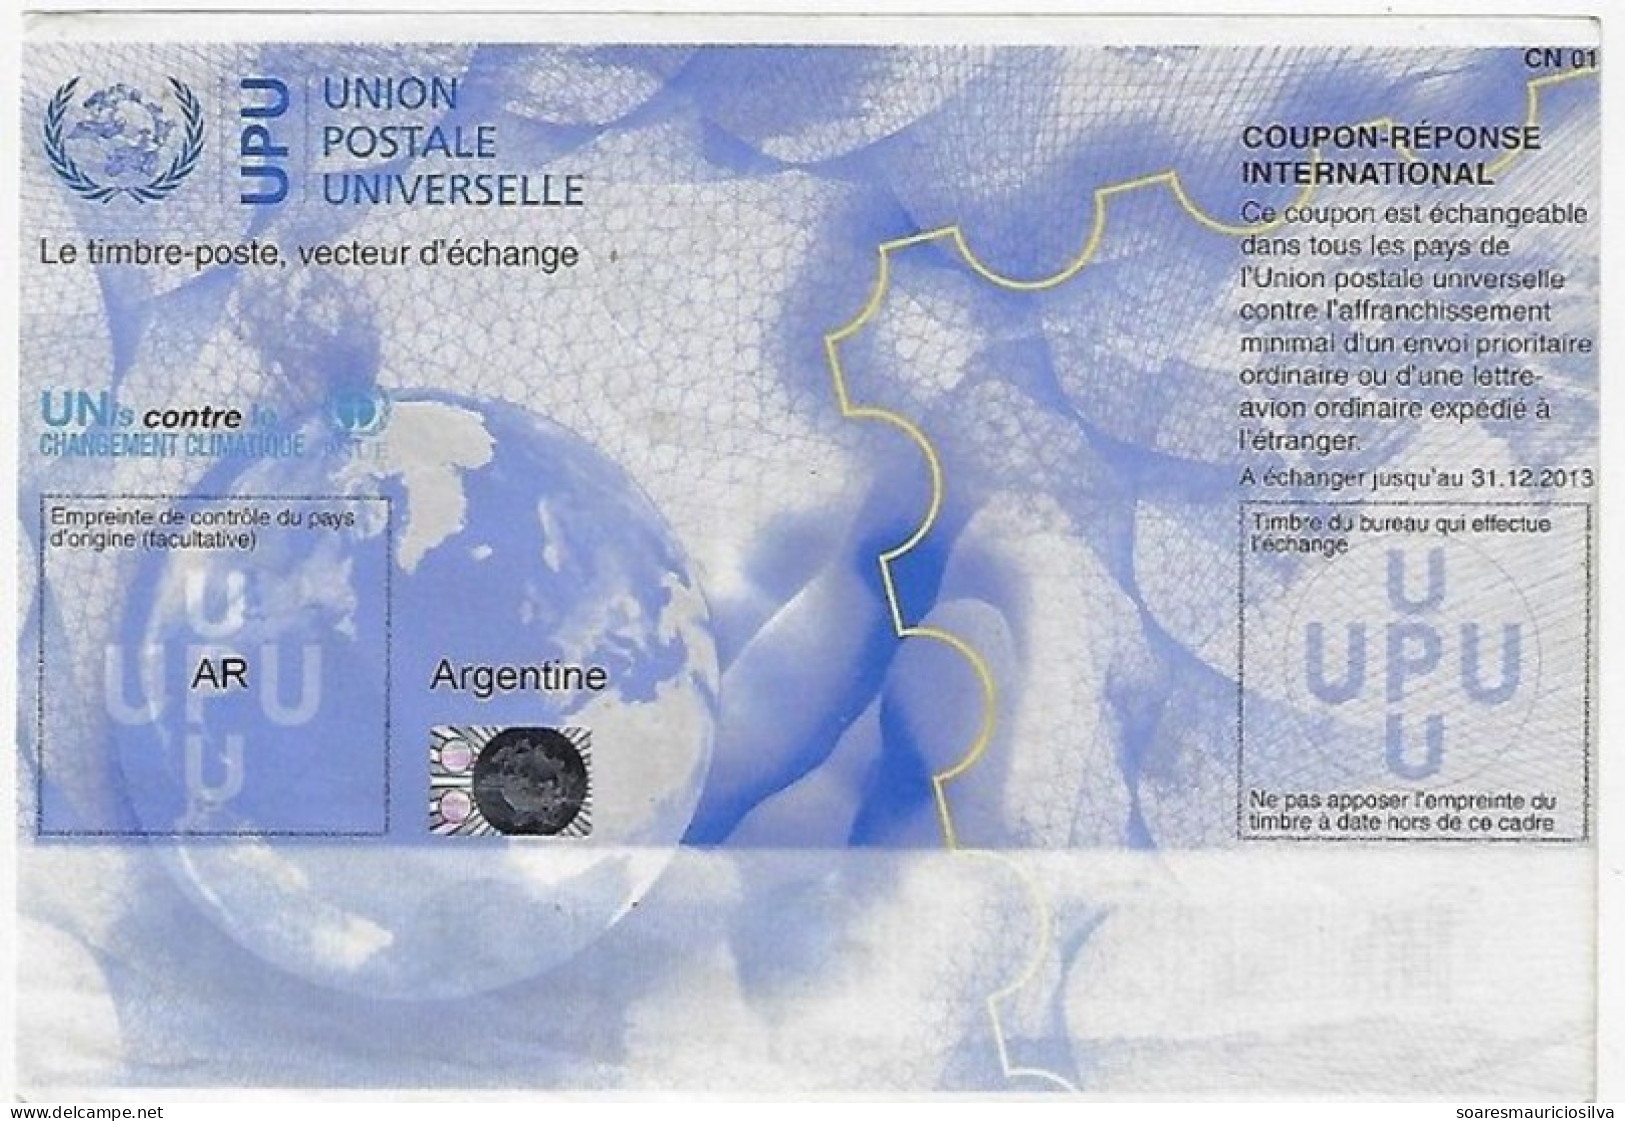 Argentina 2013 International Reply Coupon Reponse UPU United Nations Against Climate Change Terrestrial Globe Hand - Storia Postale